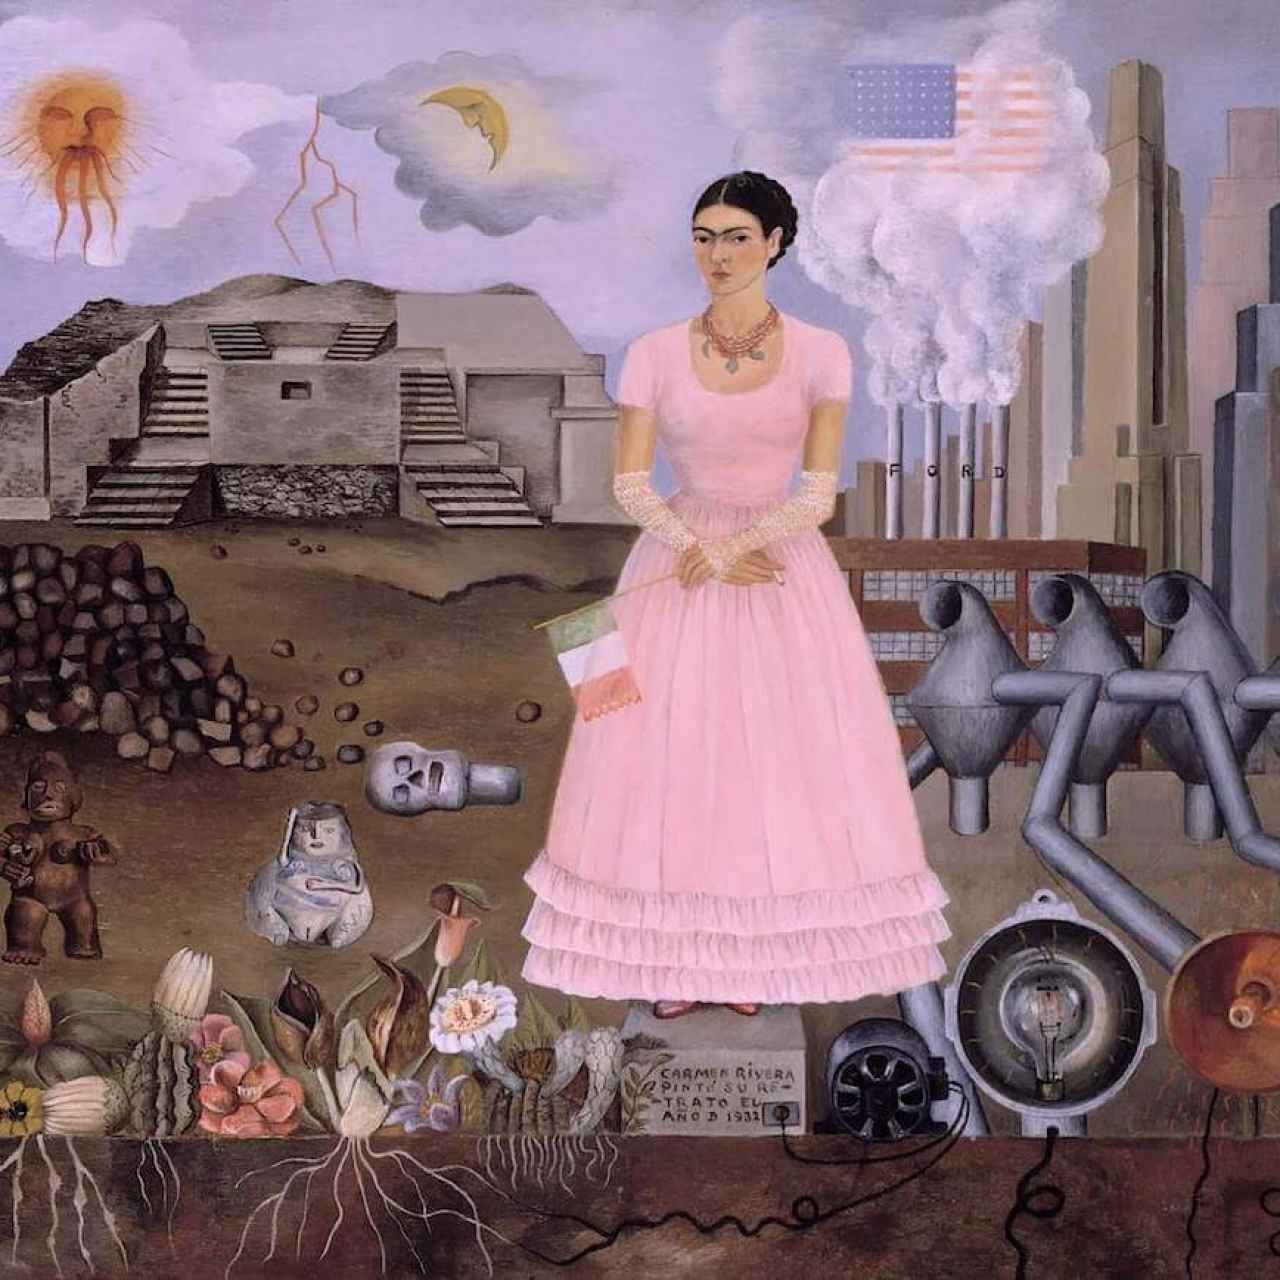 Self-portrait on the borderline between Mexico and the United States (1932), Frida Kahlo.